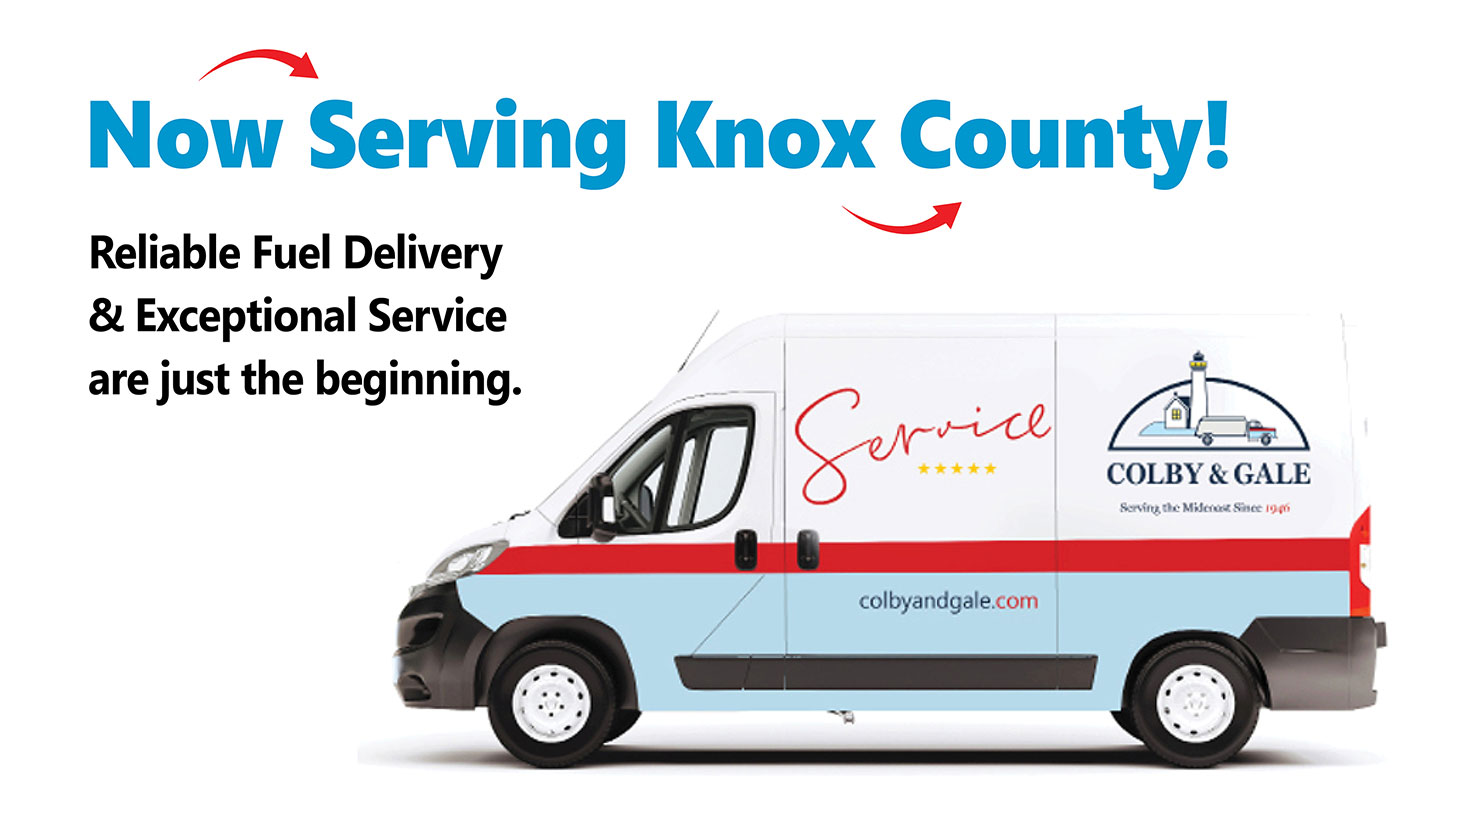 A colby and gale truck with text saying now serving Knox County!